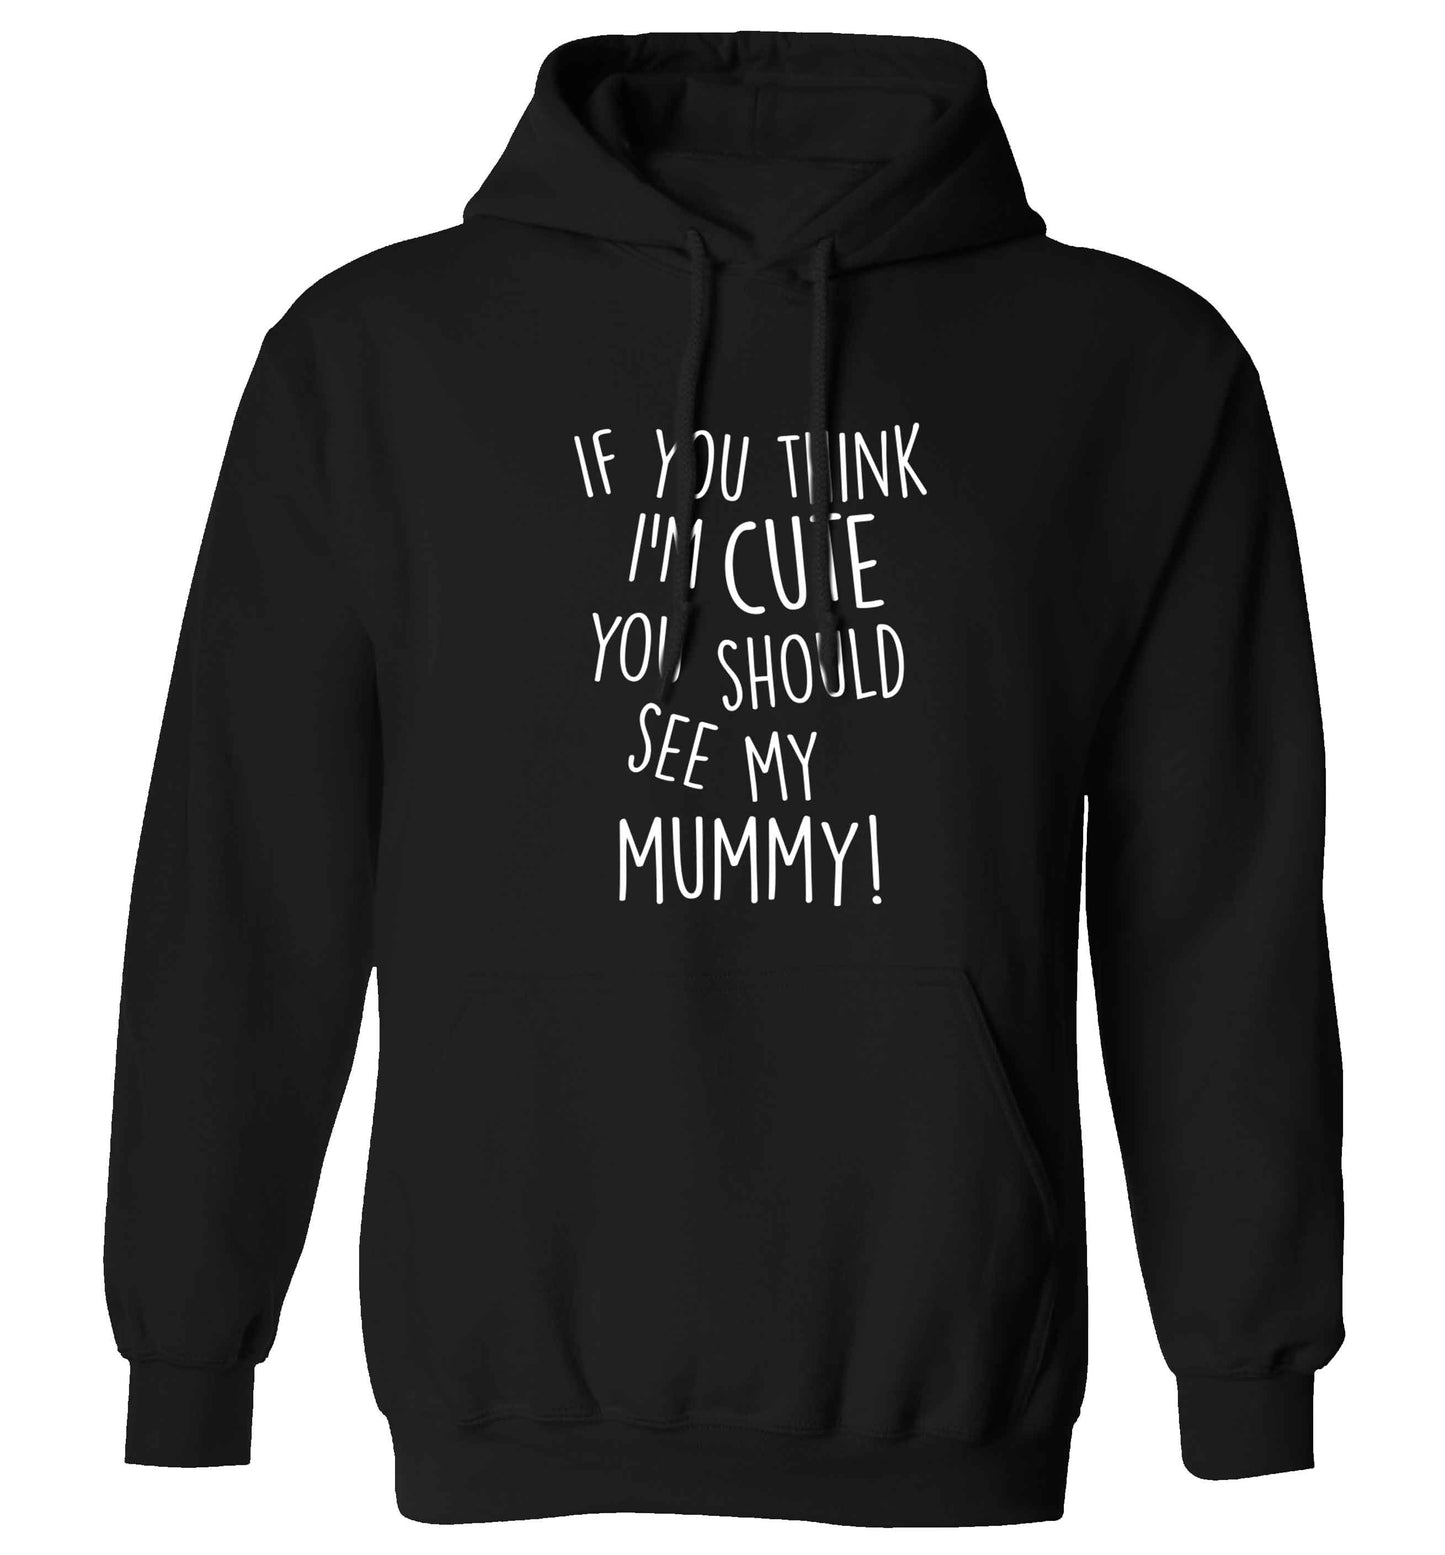 If you think I'm cute you should see my mummy adults unisex black hoodie 2XL